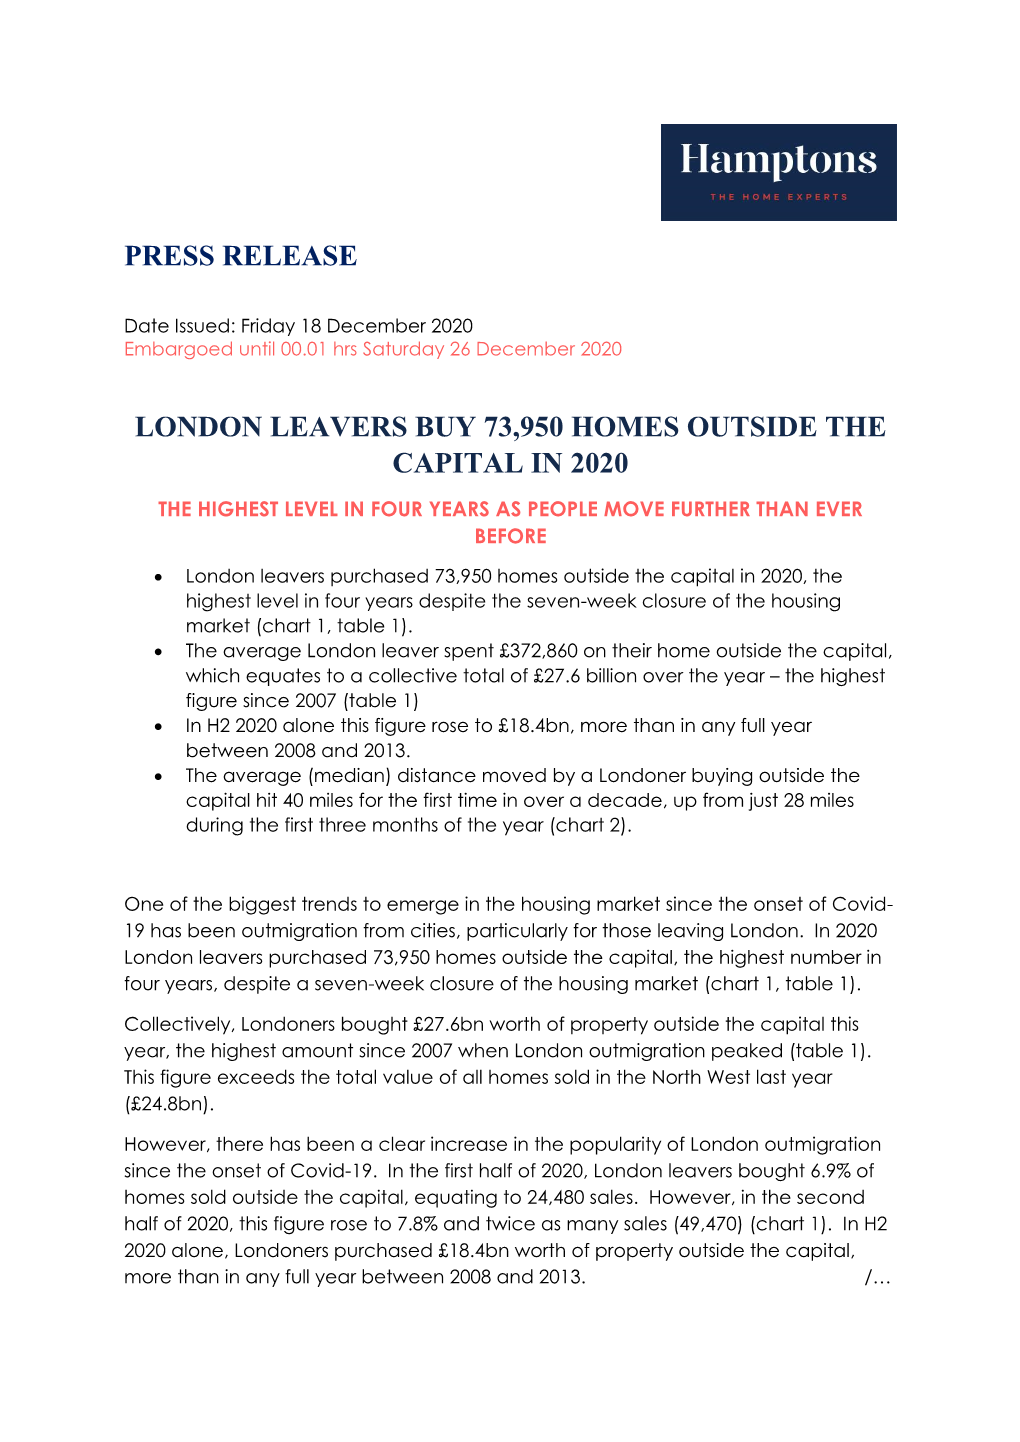 London Leavers Buy 73950 Homes Outside the Capital in 2020